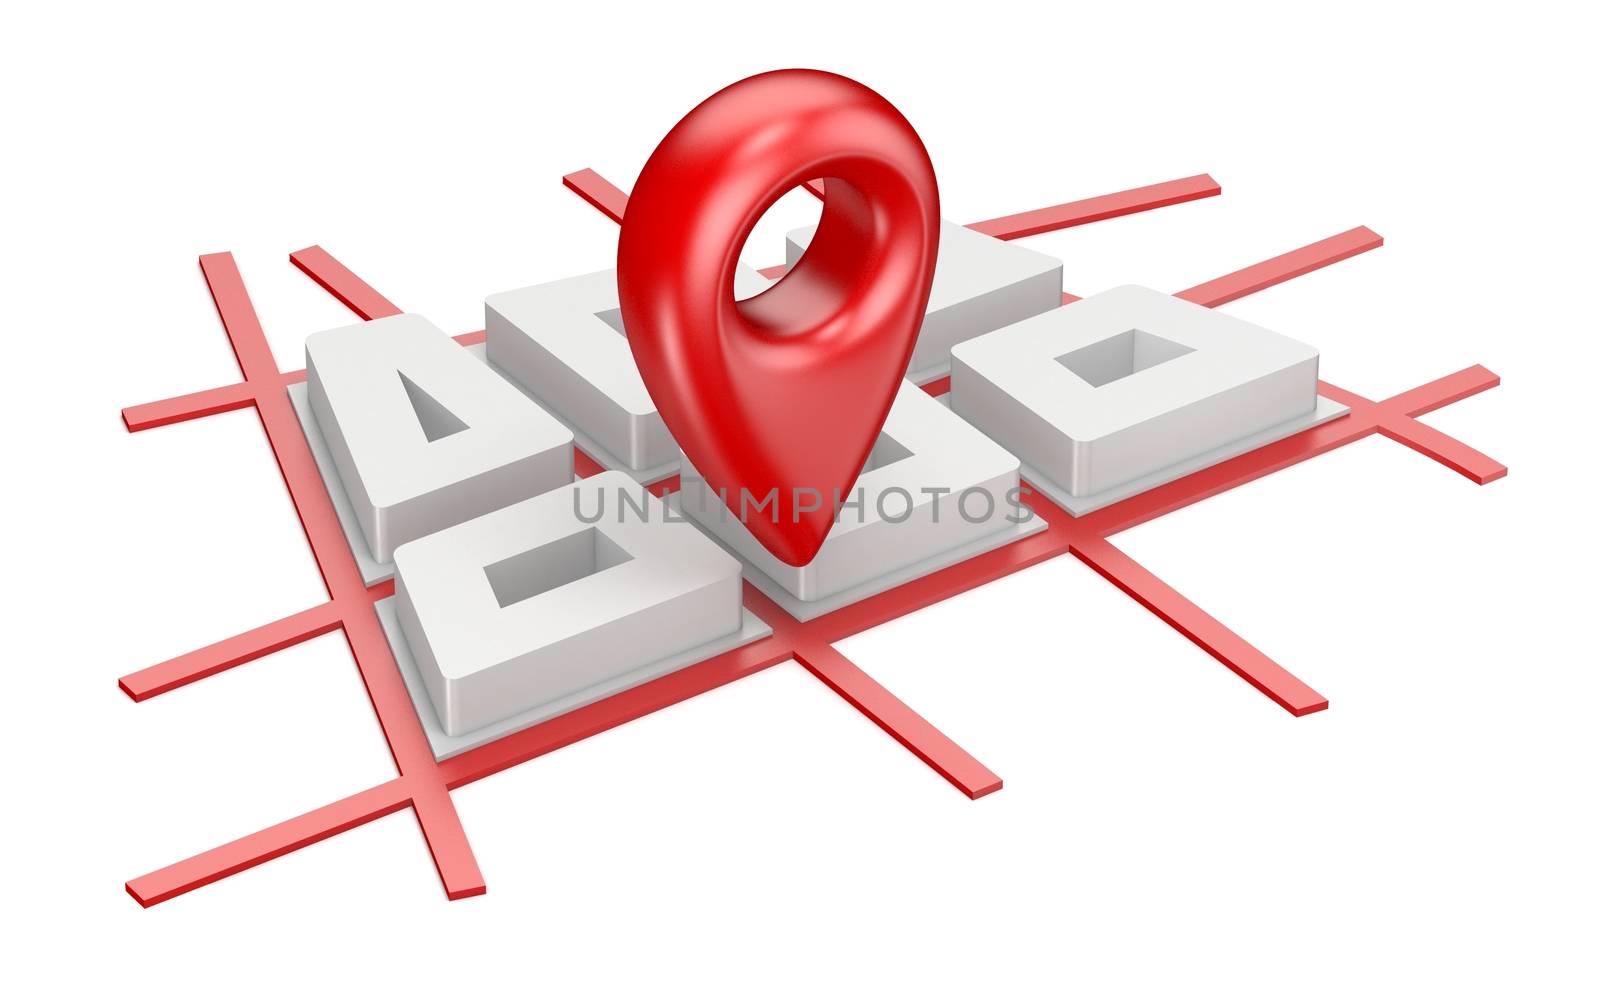 Red map pointer on city plane navigation concept 3D render illustration isolated on white background